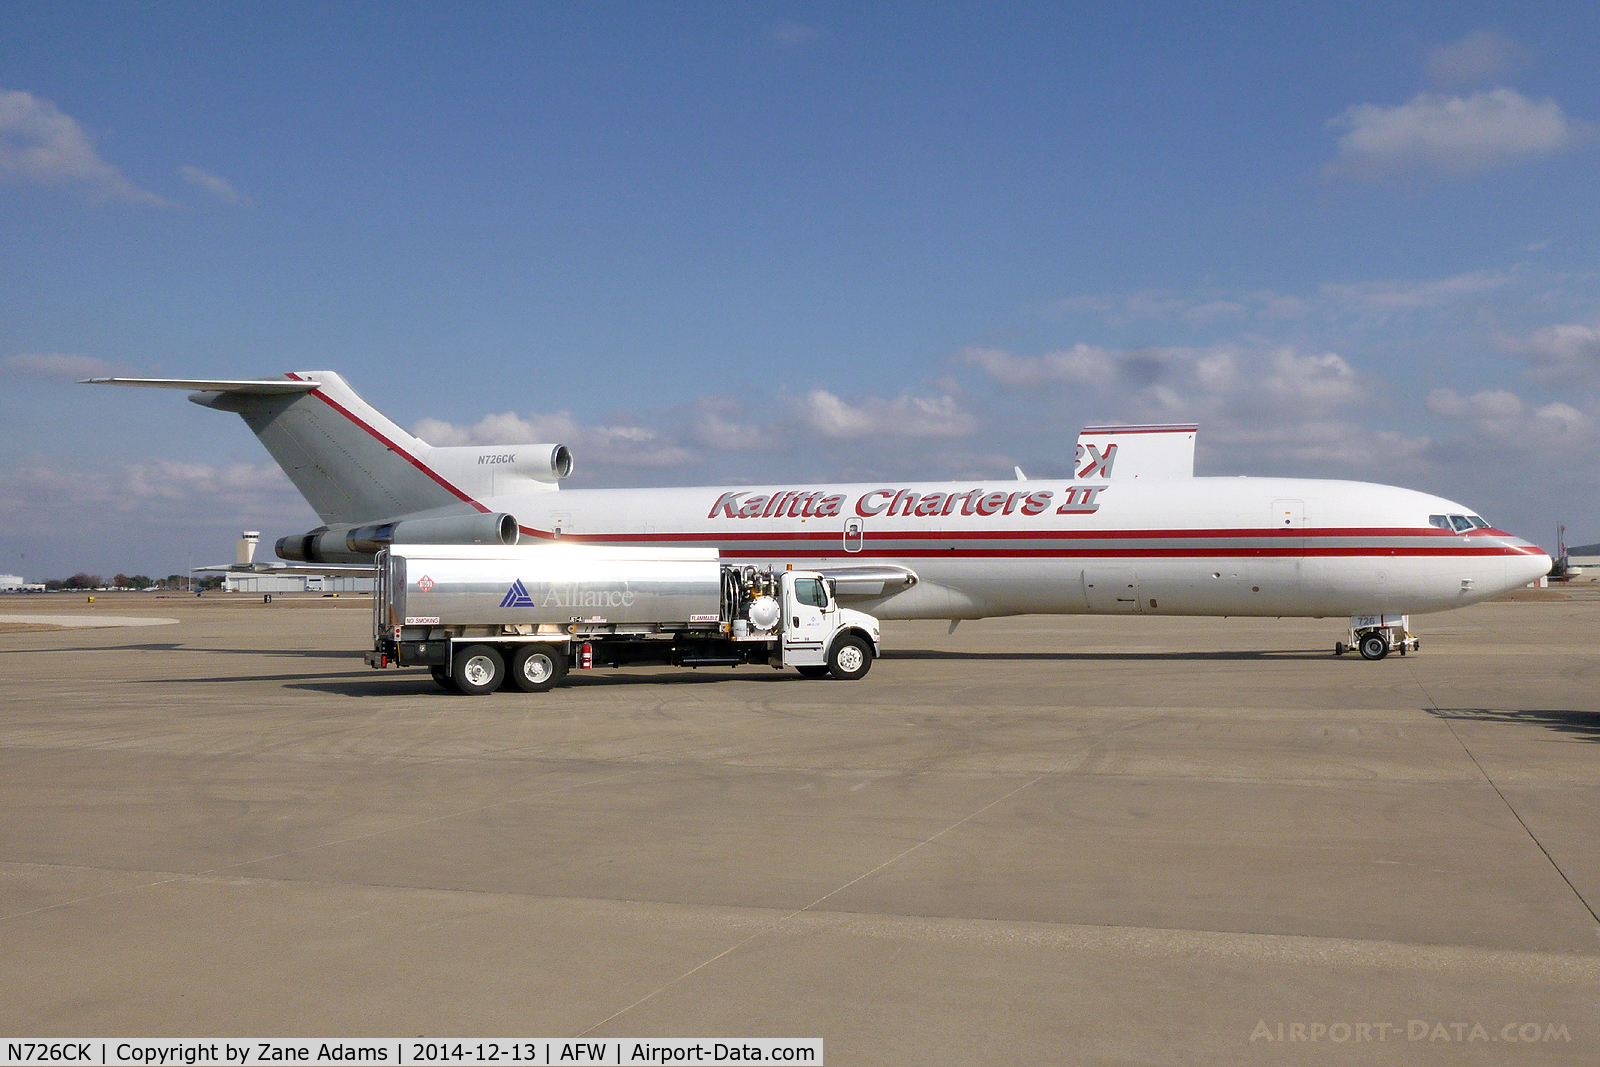 N726CK, 1980 Boeing 727-2M7 C/N 21951, On the west freight ramp at Alliance Fort Worth.